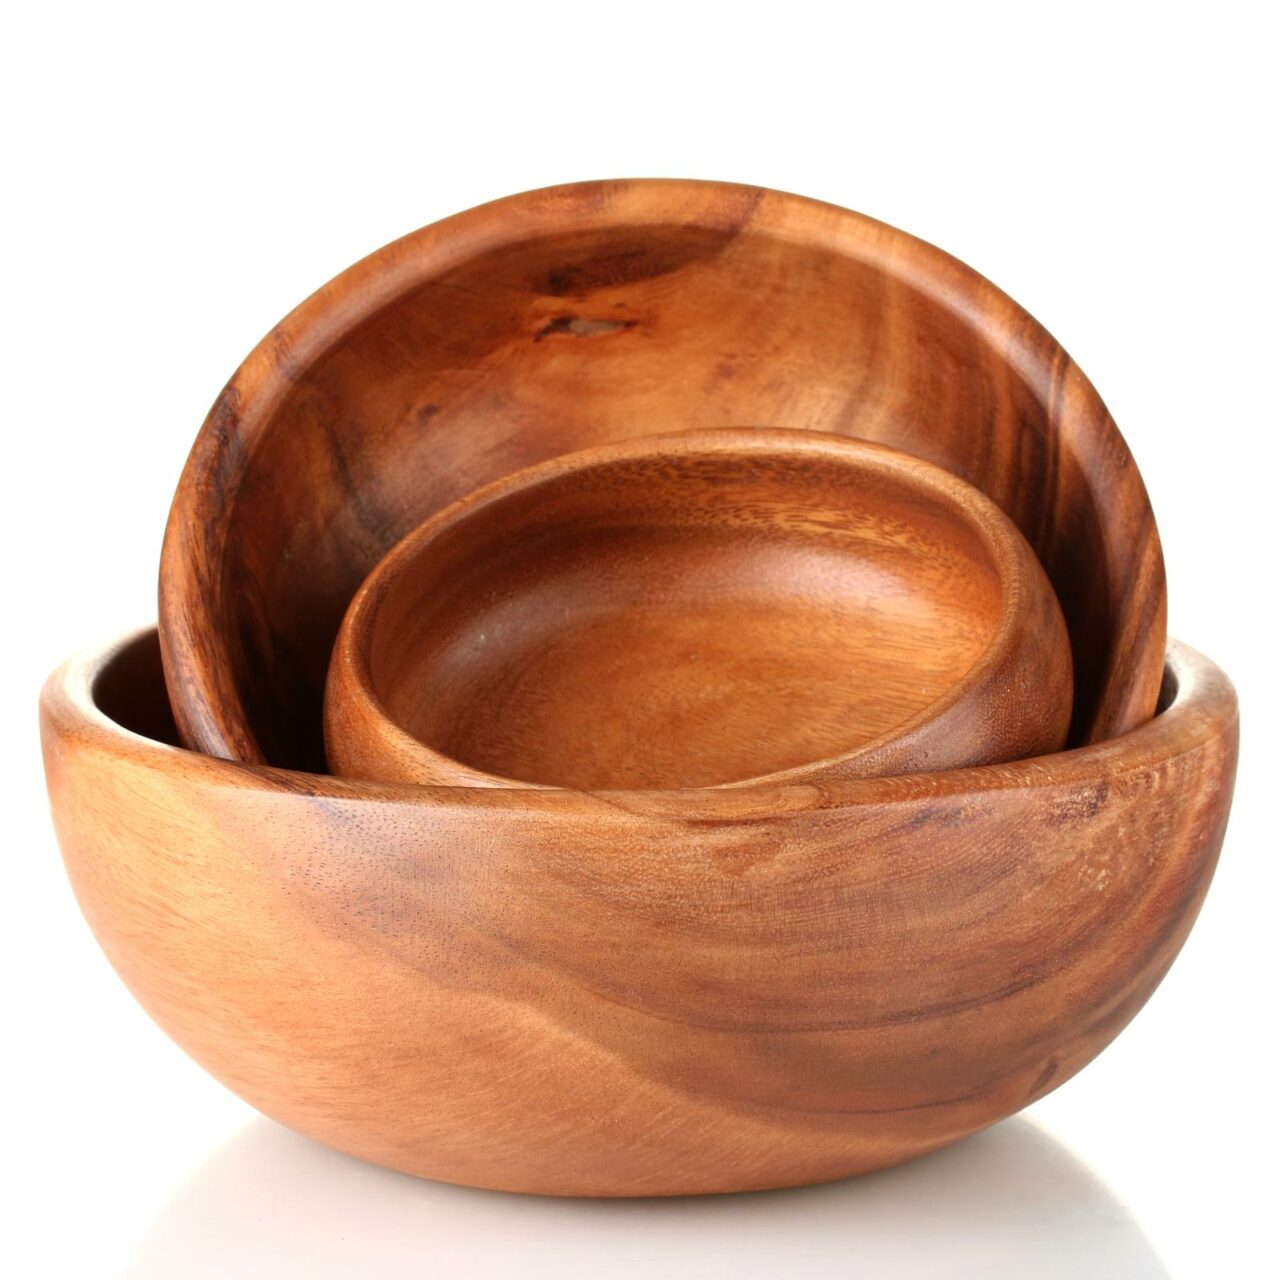 Top Unique Michigan-Made Wooden Bowls for Gifts